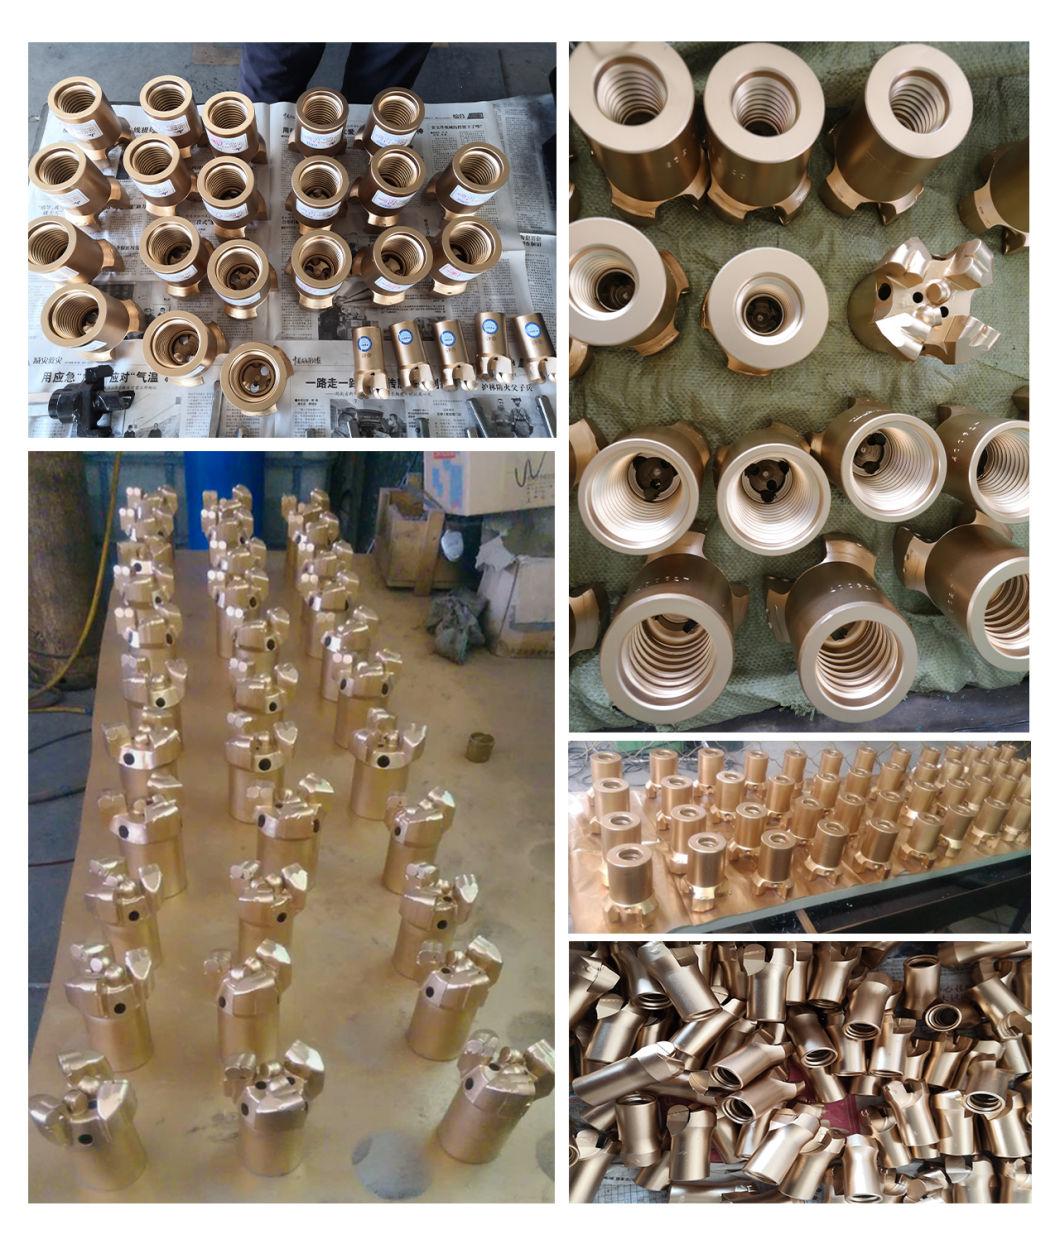 Fast Penetration PDC/Pax/Tsp Drill Bit, 8 PDC Cutters PCD Coring Bits for Soft/Medium Hard Rock with Long Service Life